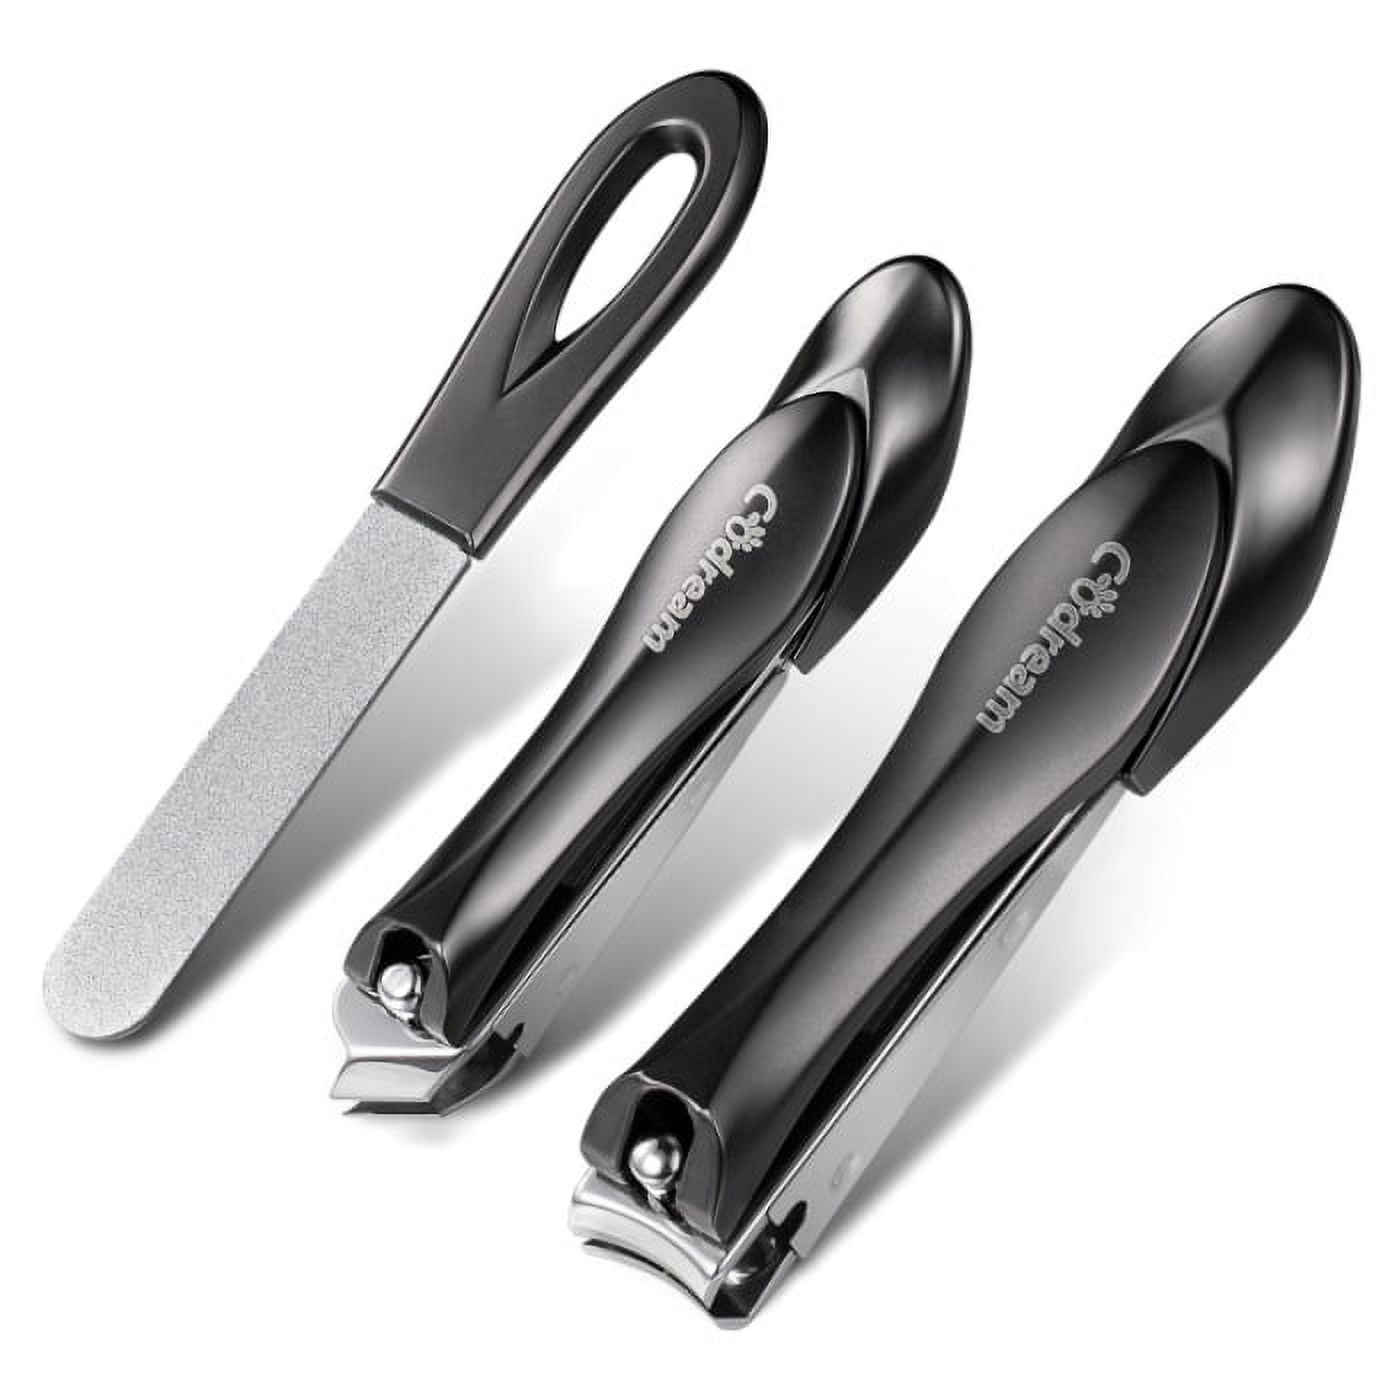 Ultra Wide Jaw Opening Big Nail Clippers Set Toenail Clippers For